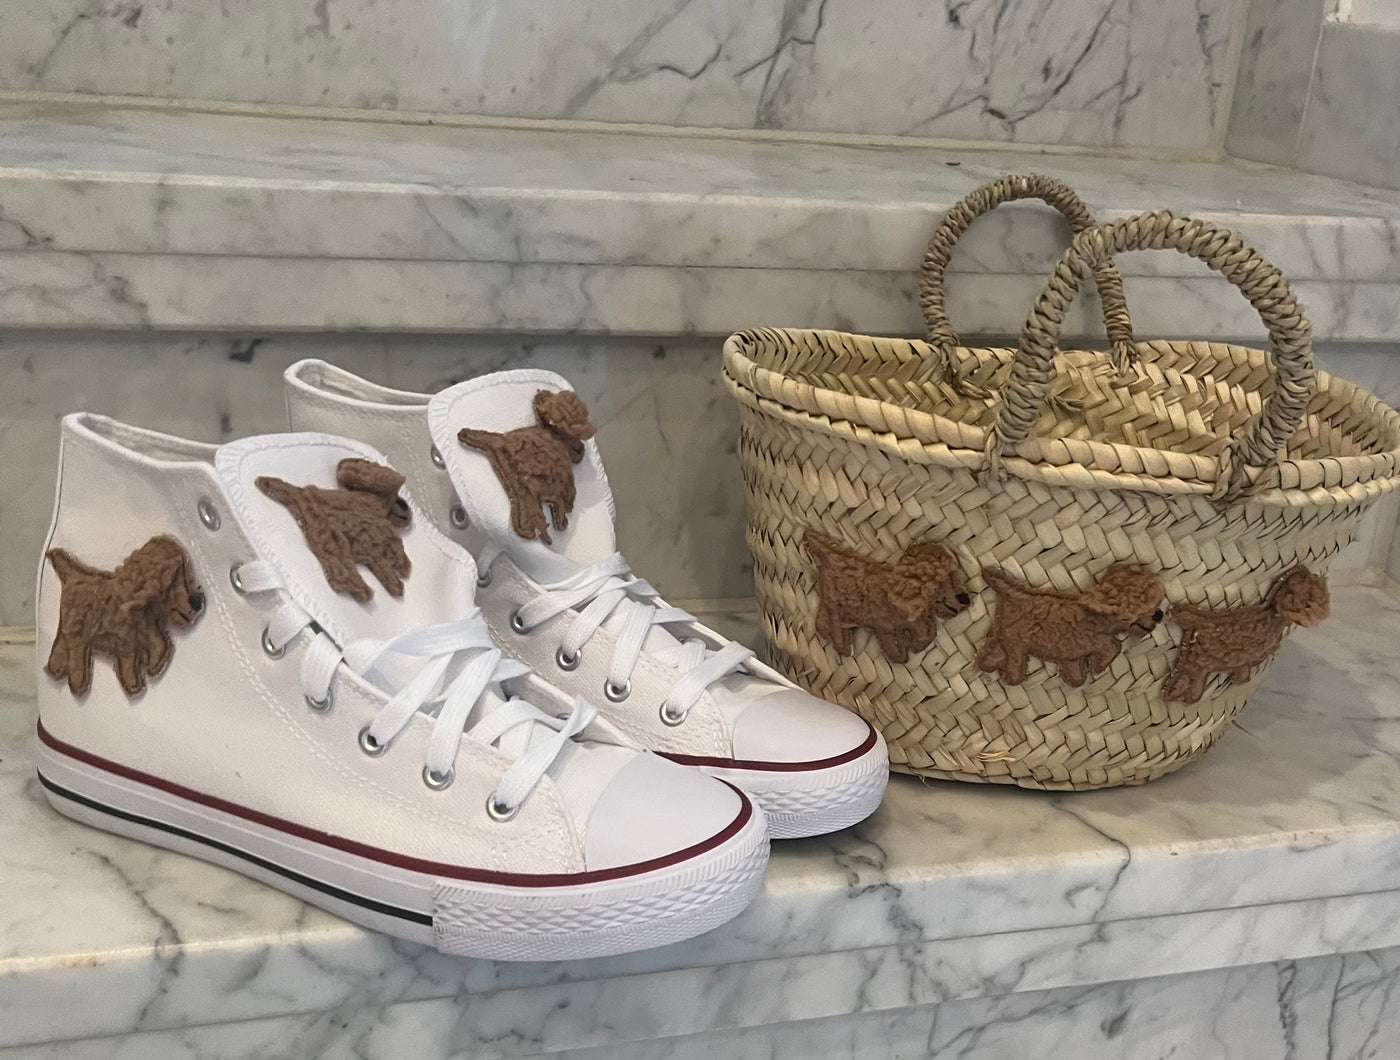 Dog Bobby sneaker with applications